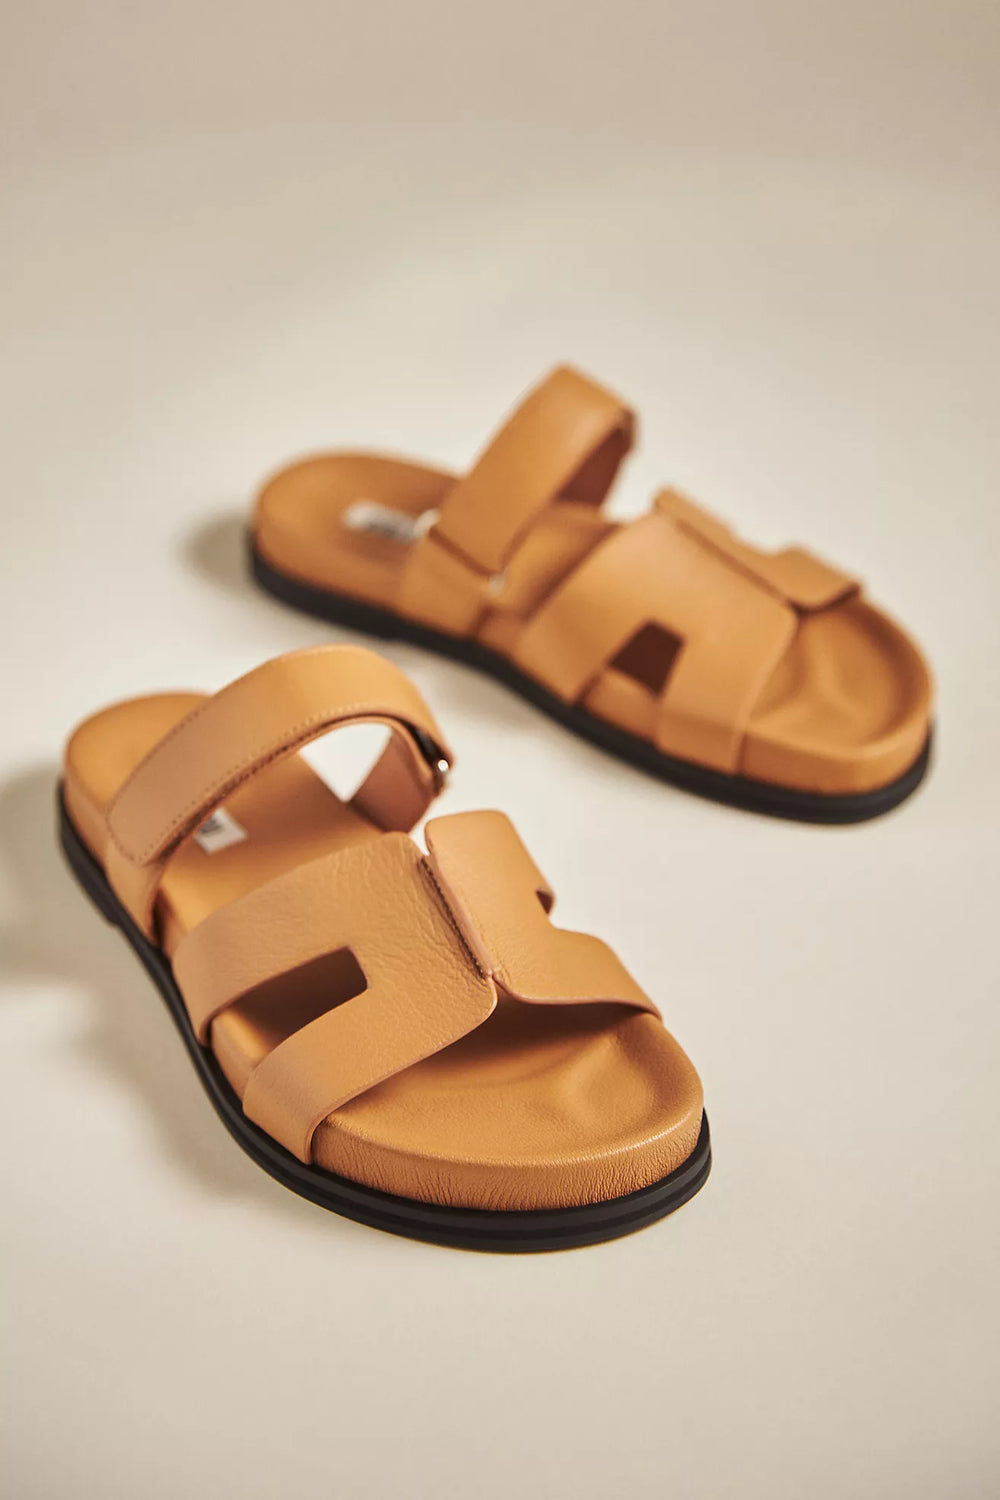 HERMÈS CHYPRE SANDALS REVIEW, SIZING & TRY-ON - YouTube